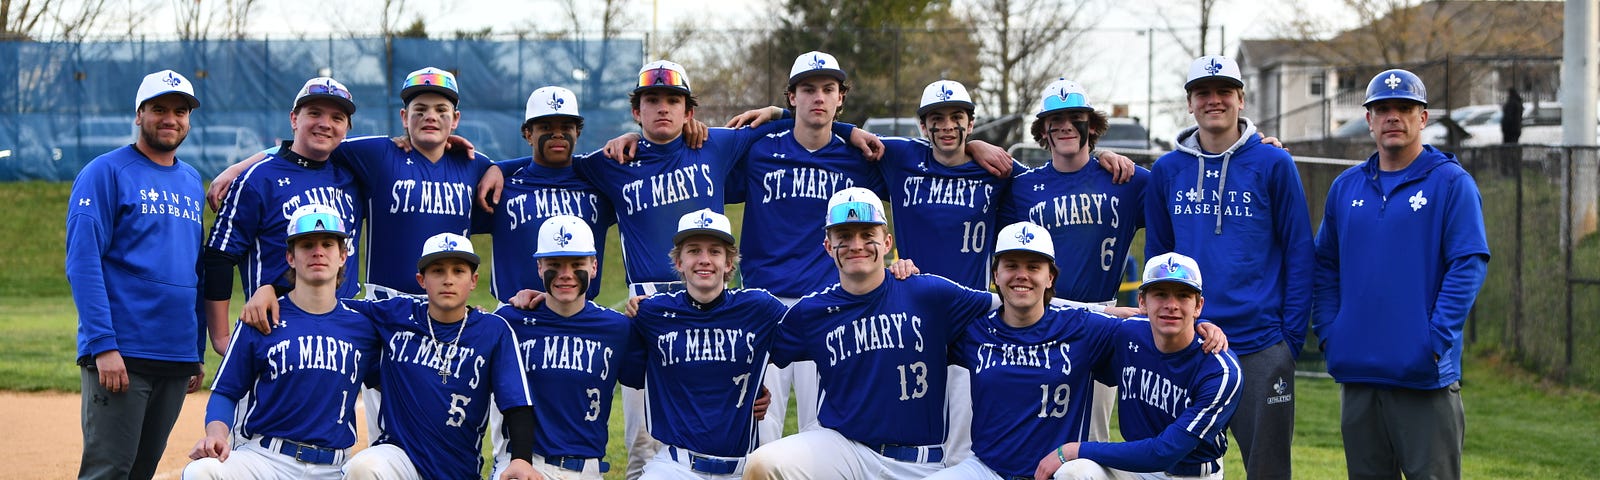 Author (far right) with his mighty and beloved St. Mary’s Junior Varsity Saints.